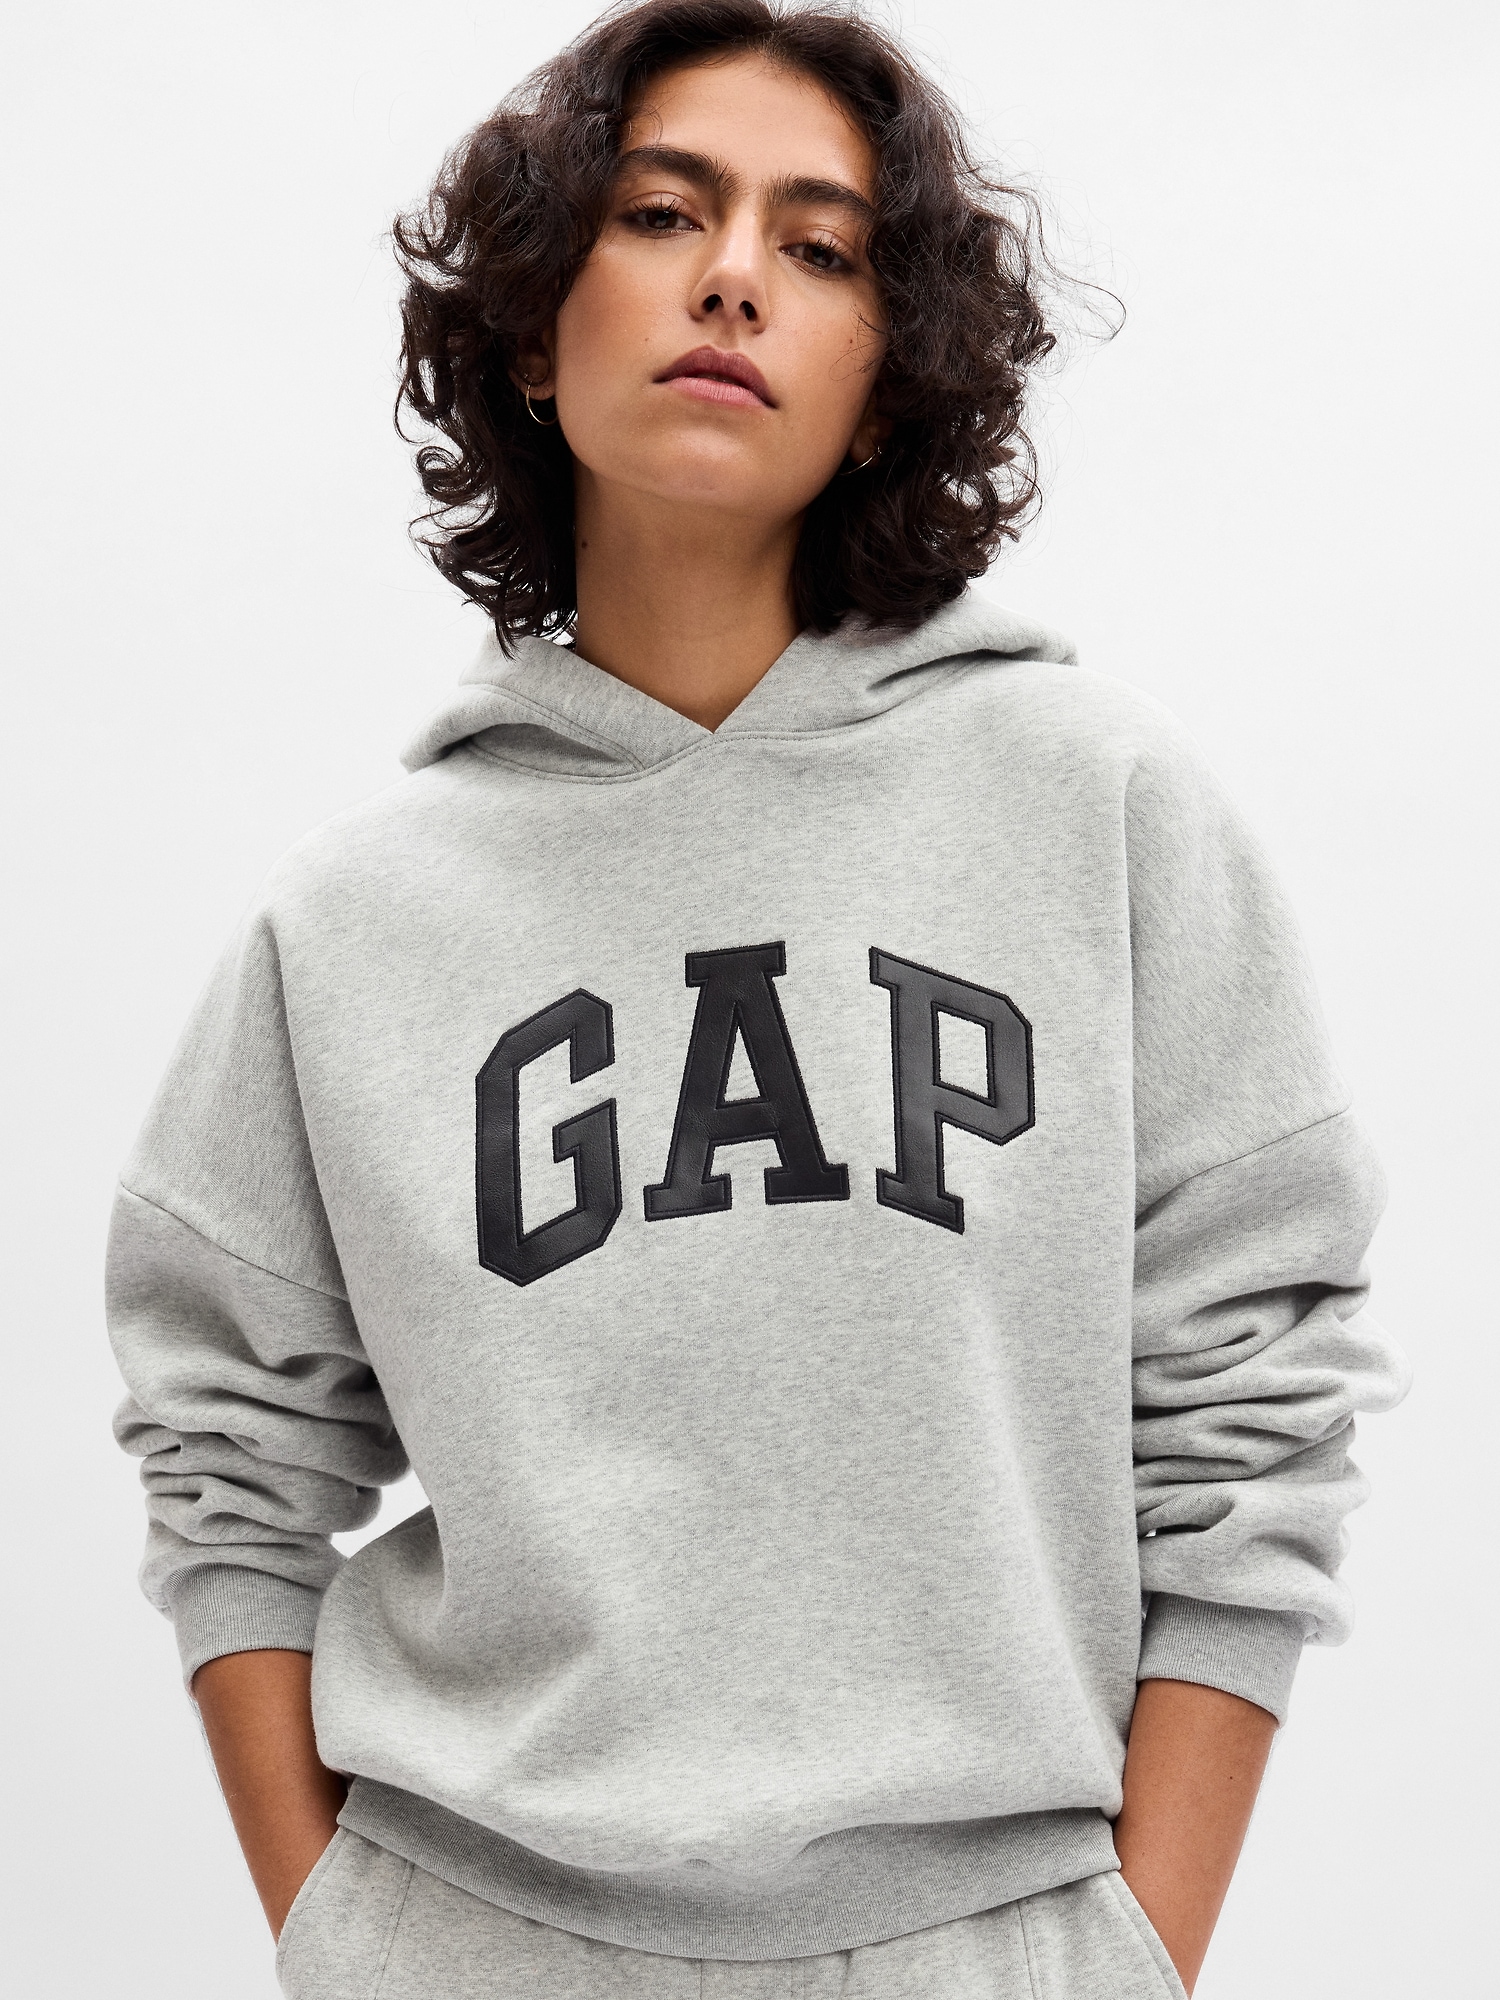 Why Vintage Gap Is Hot and Current Gap Is Not